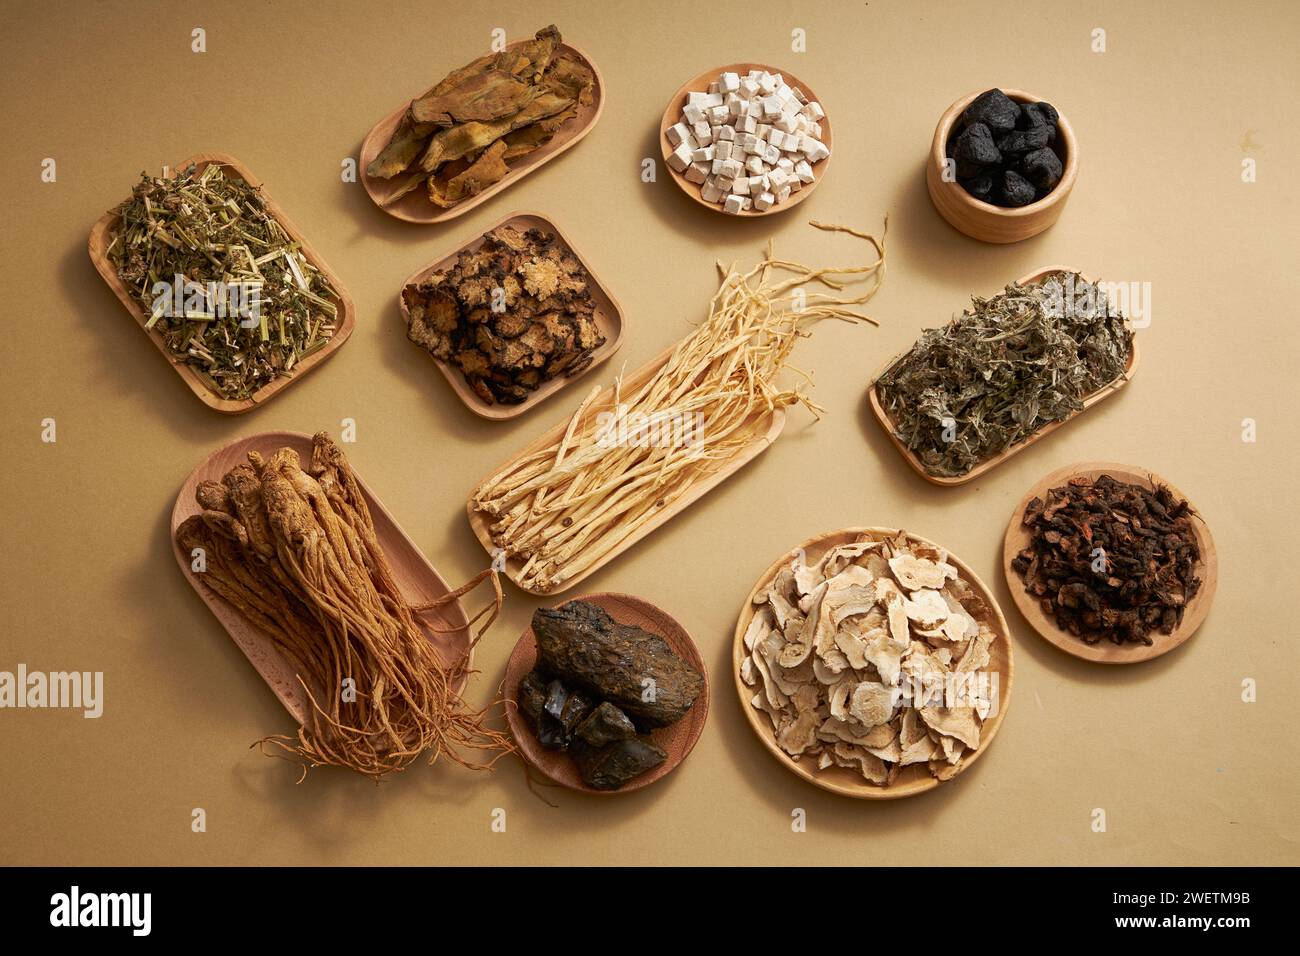 Traditional Chinese medicine with herbs placed in wooden plates on light brown background. Top view, scene for medicine advertising Stock Photo